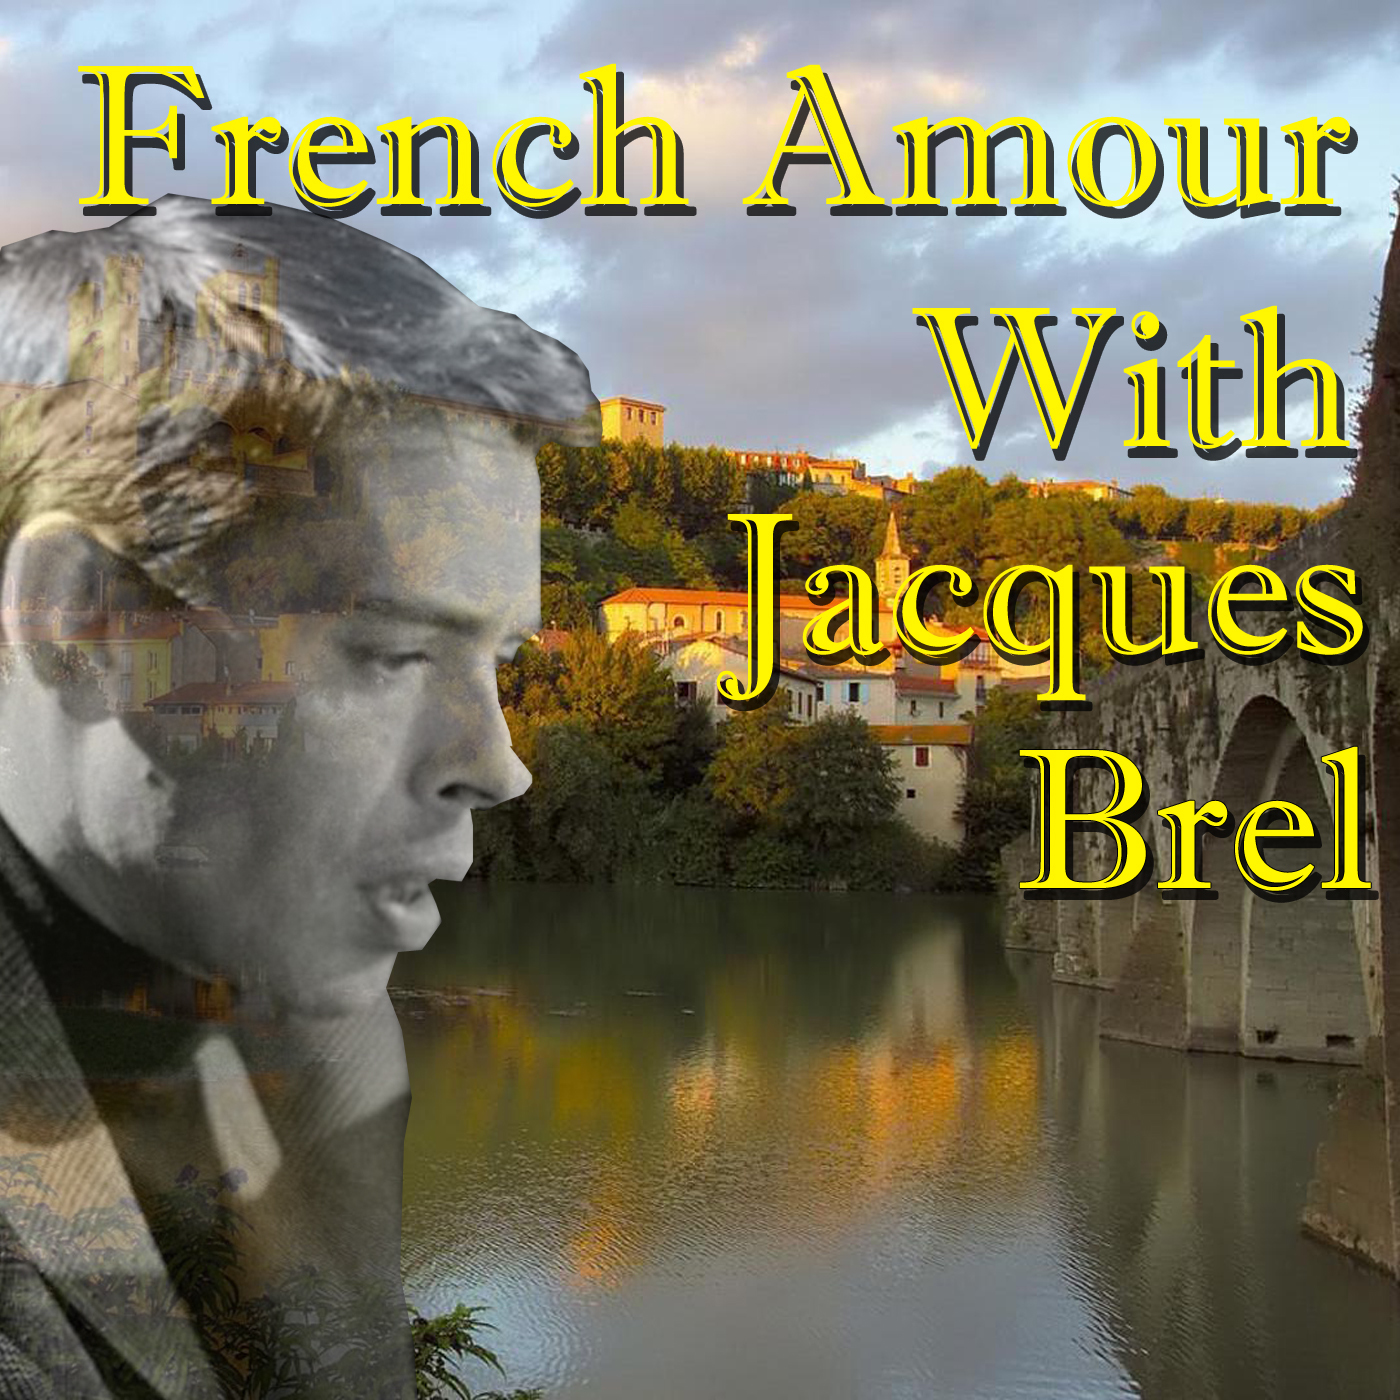 French Amour With Jacques Brel, Vol.2